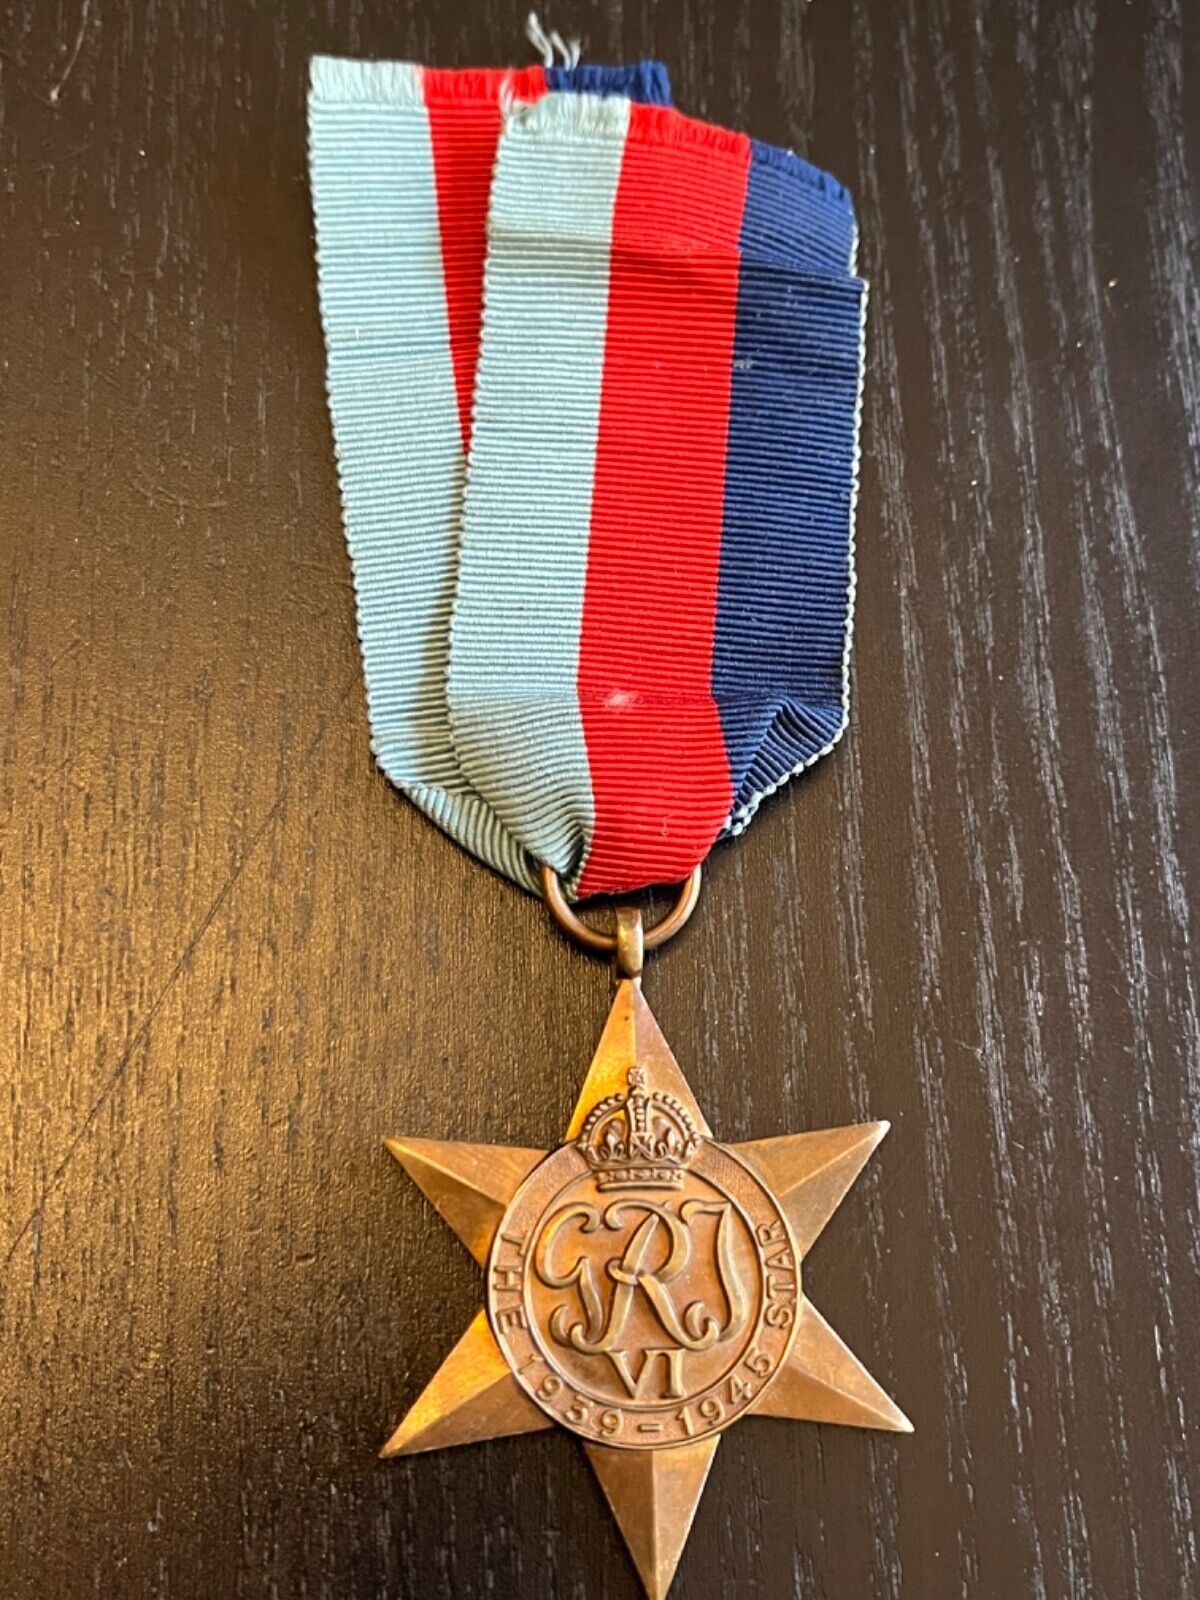 Full Size British Military Medal WWII WW2 The 1939 1945 Star w/ ribbon